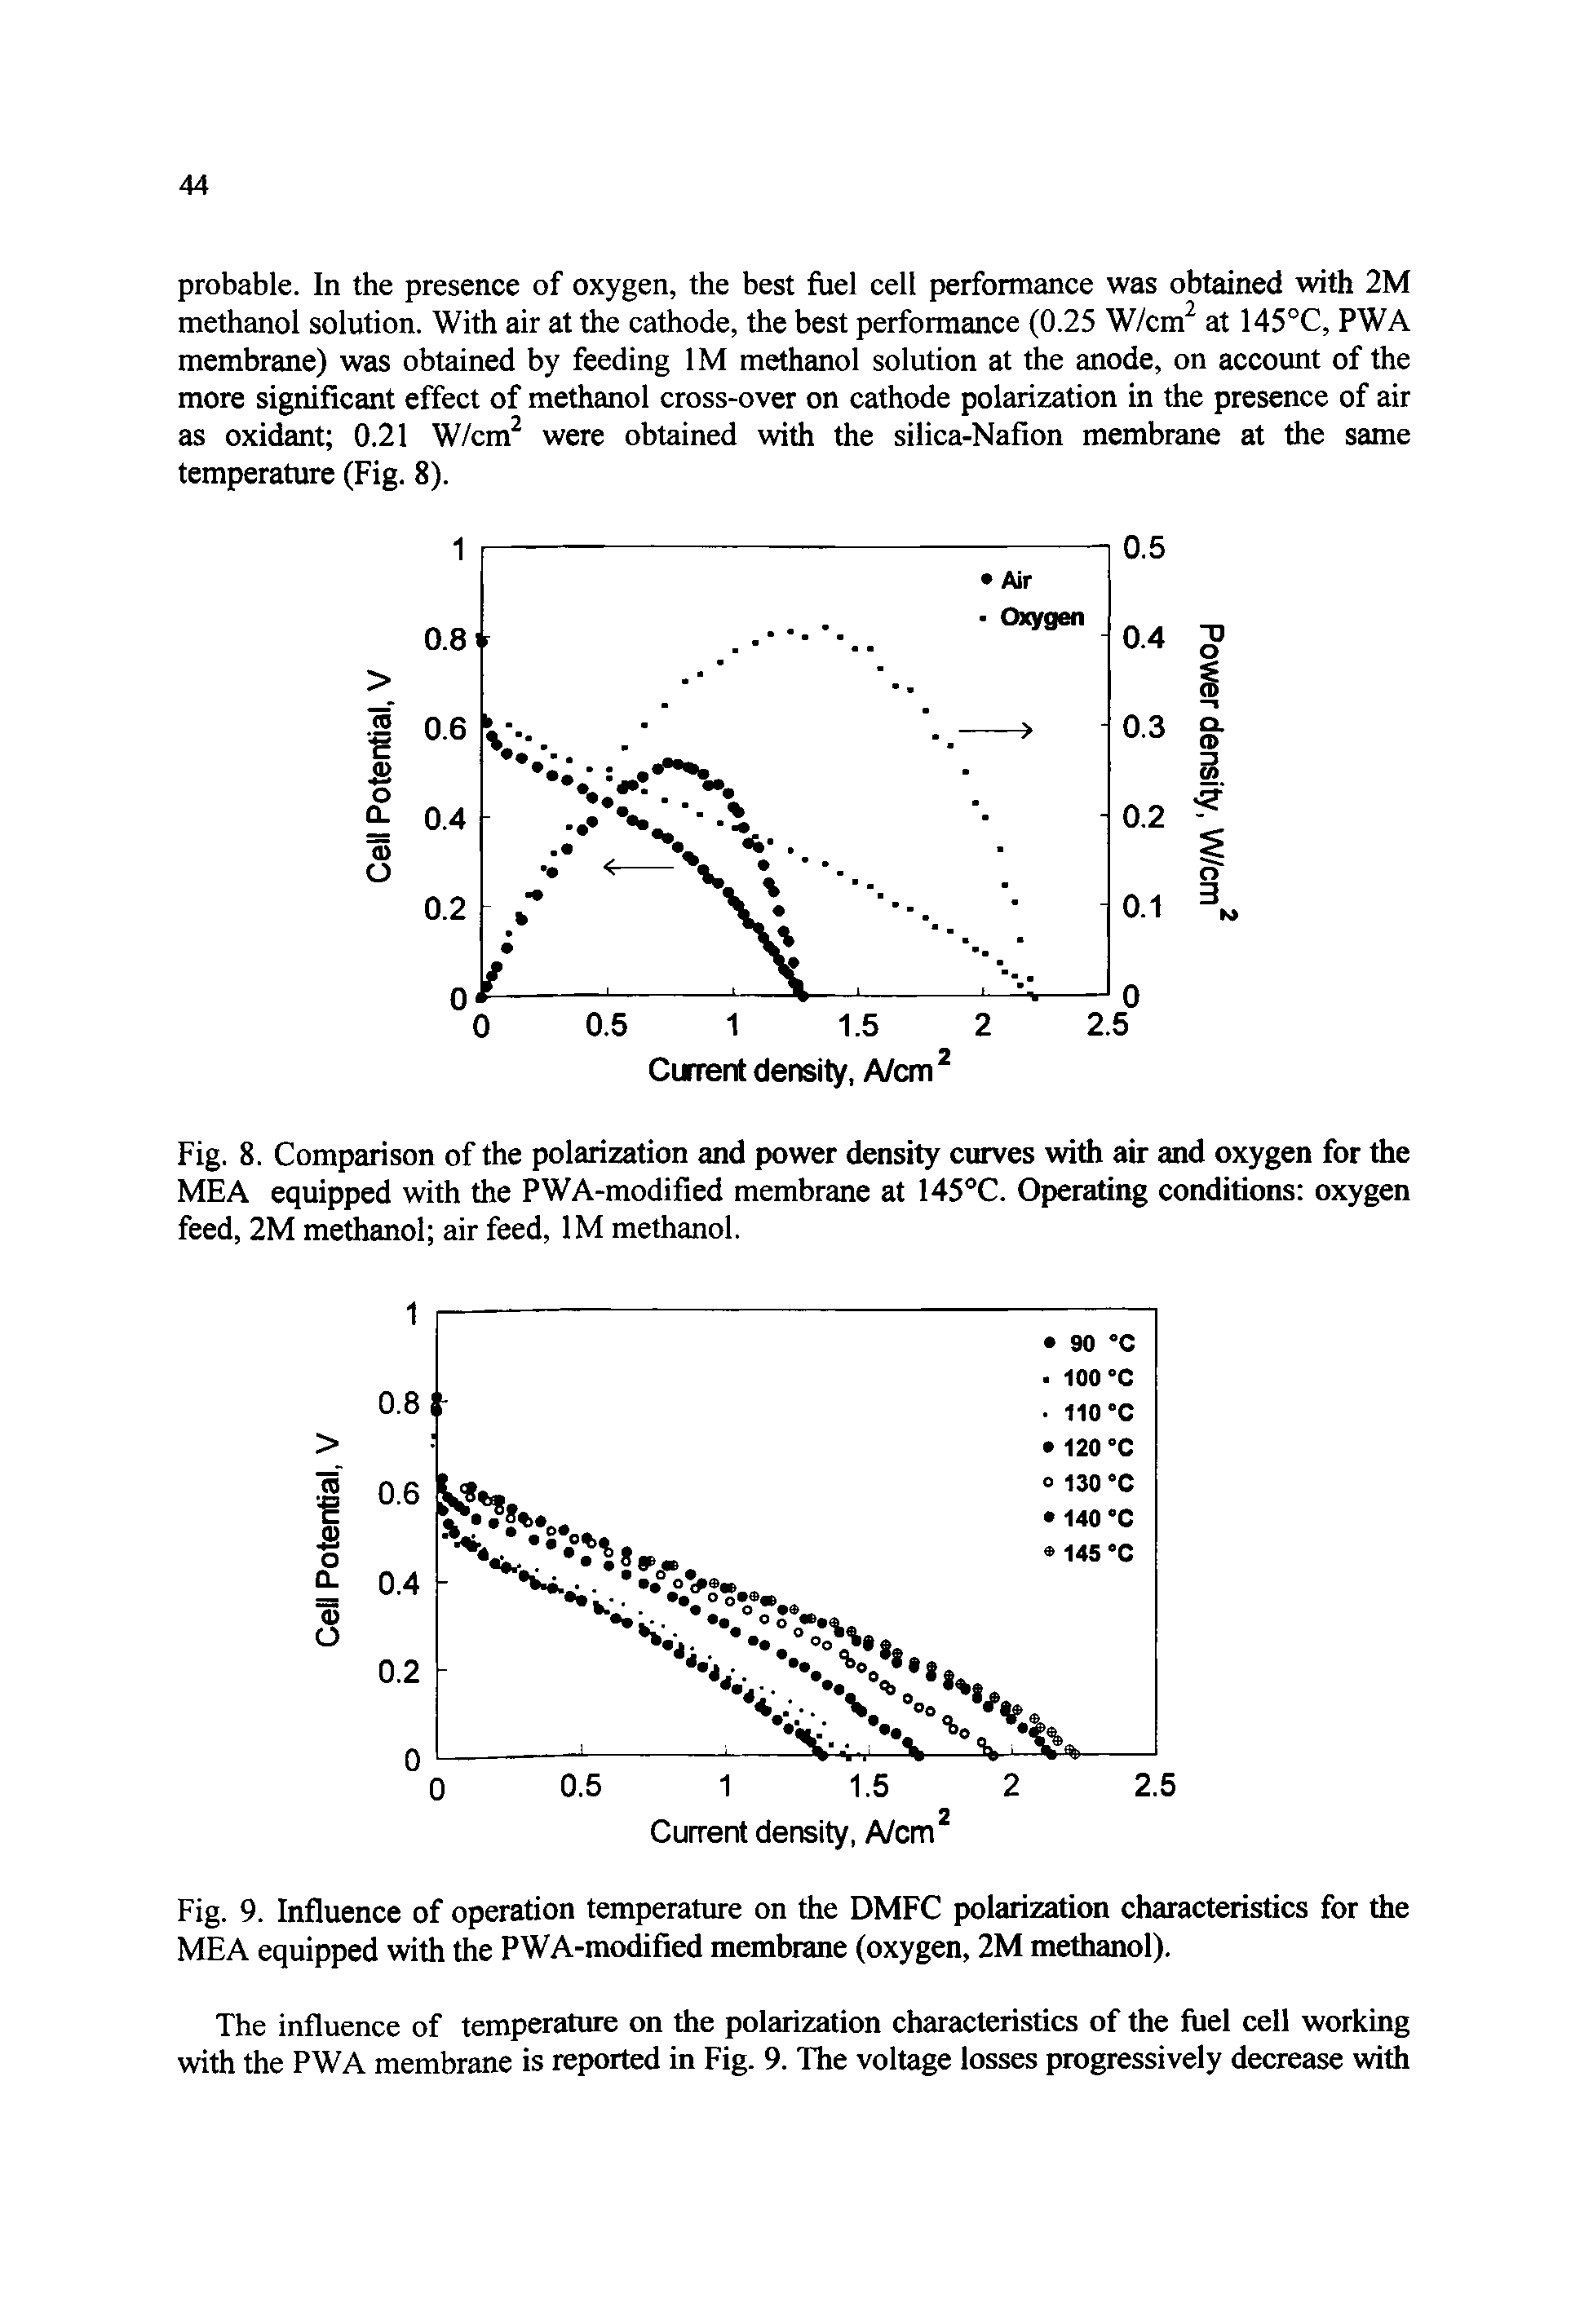 Fig. 8. Comparison of the polarization and power density curves with air and oxygen for the MEA equipped with the PWA-modified membrane at 145°C. Operating conditions oxygen feed, 2M methanol air feed, IM methanol.